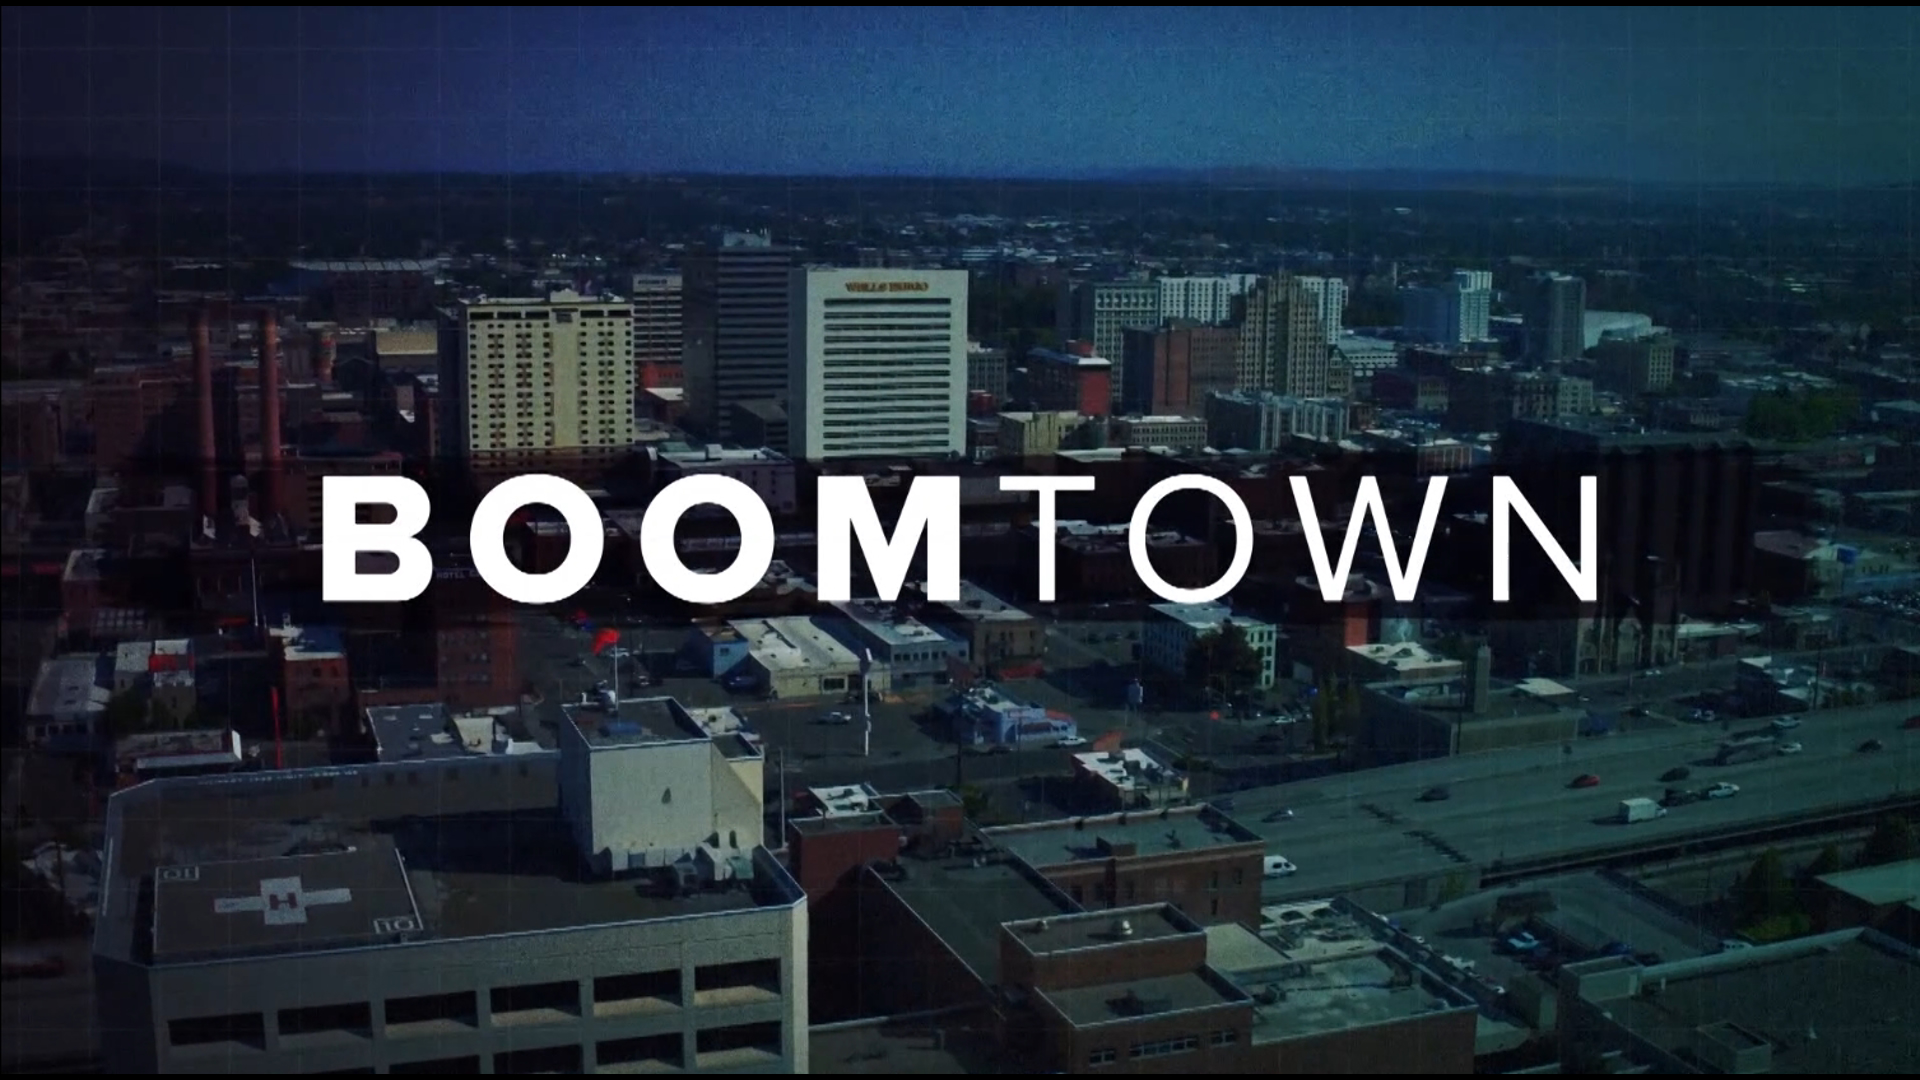 From the North-South Freeway to the downtown Spokane Stadium and more, KREM 2 News is tracking the biggest projects in the Inland Northwest in this Boomtown special.